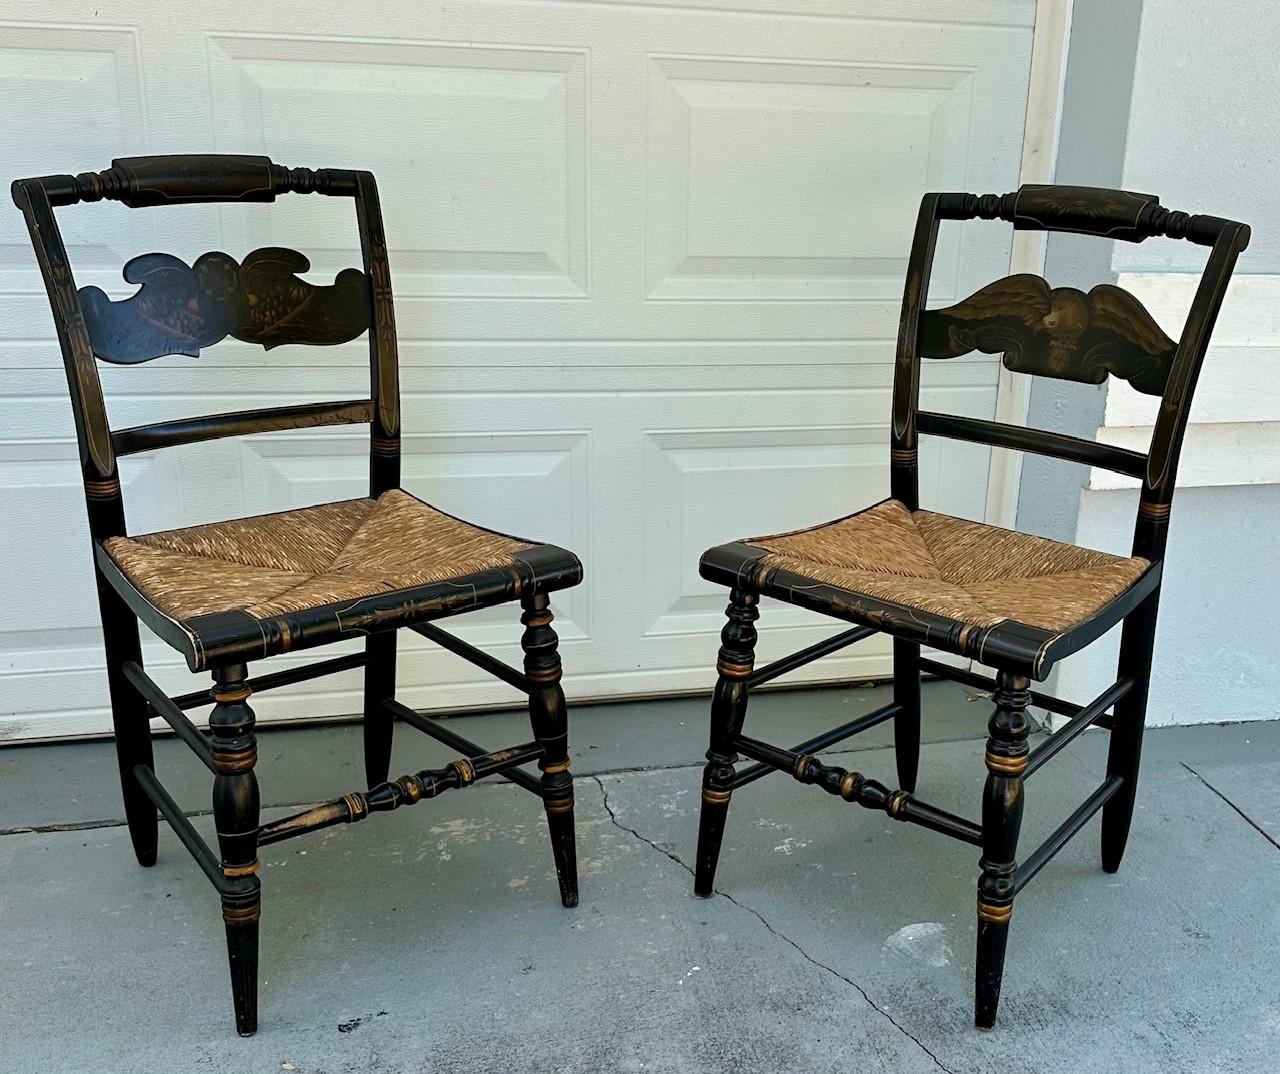 Pair of 2 Hitchcock Black Federal Side Chairs, Rush Seats.

These vintage Hitchcock chairs are black lacquer painted and embellished with ochre banding and gold stencil work.  One slatback chair is decorated with a harvest design, the other chair